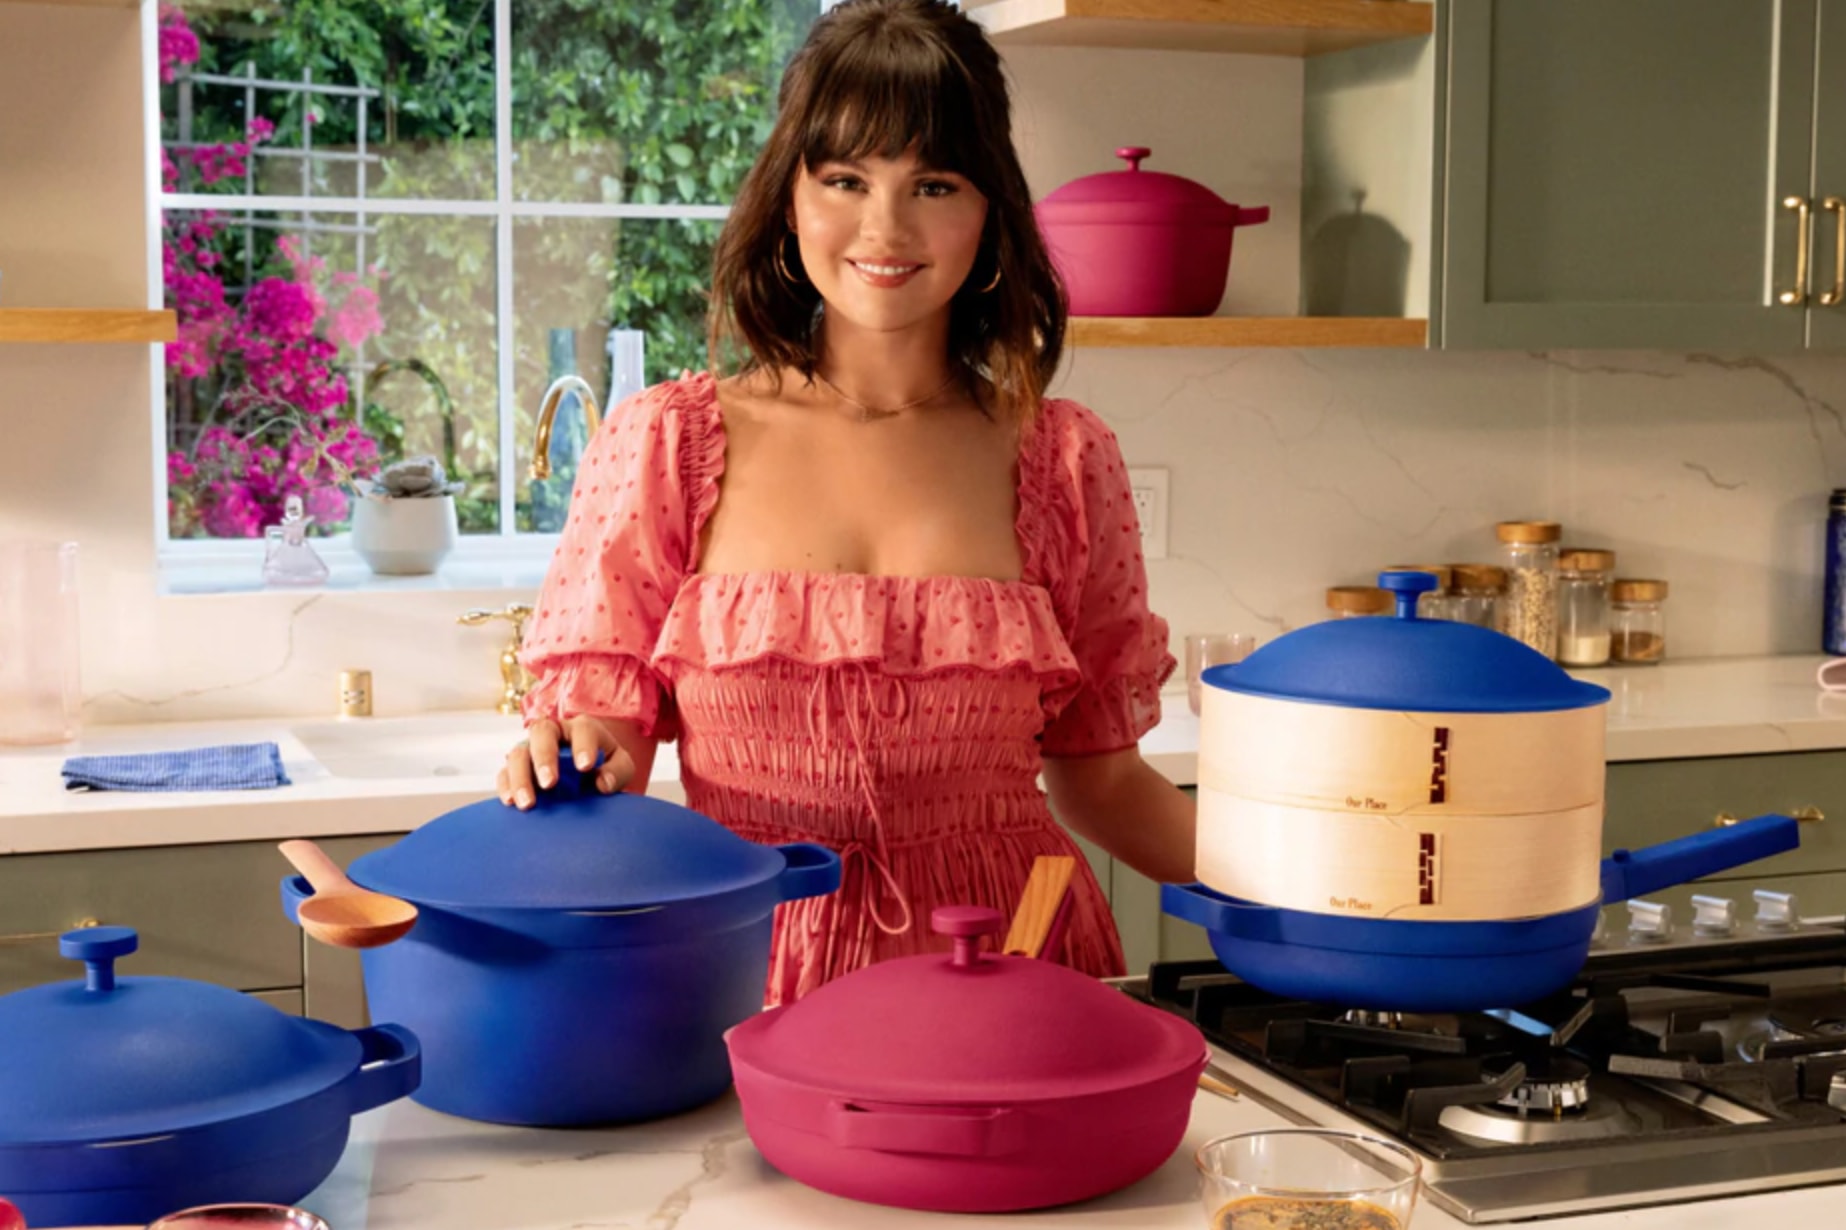 Our Place Selena Gomez cookware collection release always pan perfect pot Rosa Azul Selena + Chef 